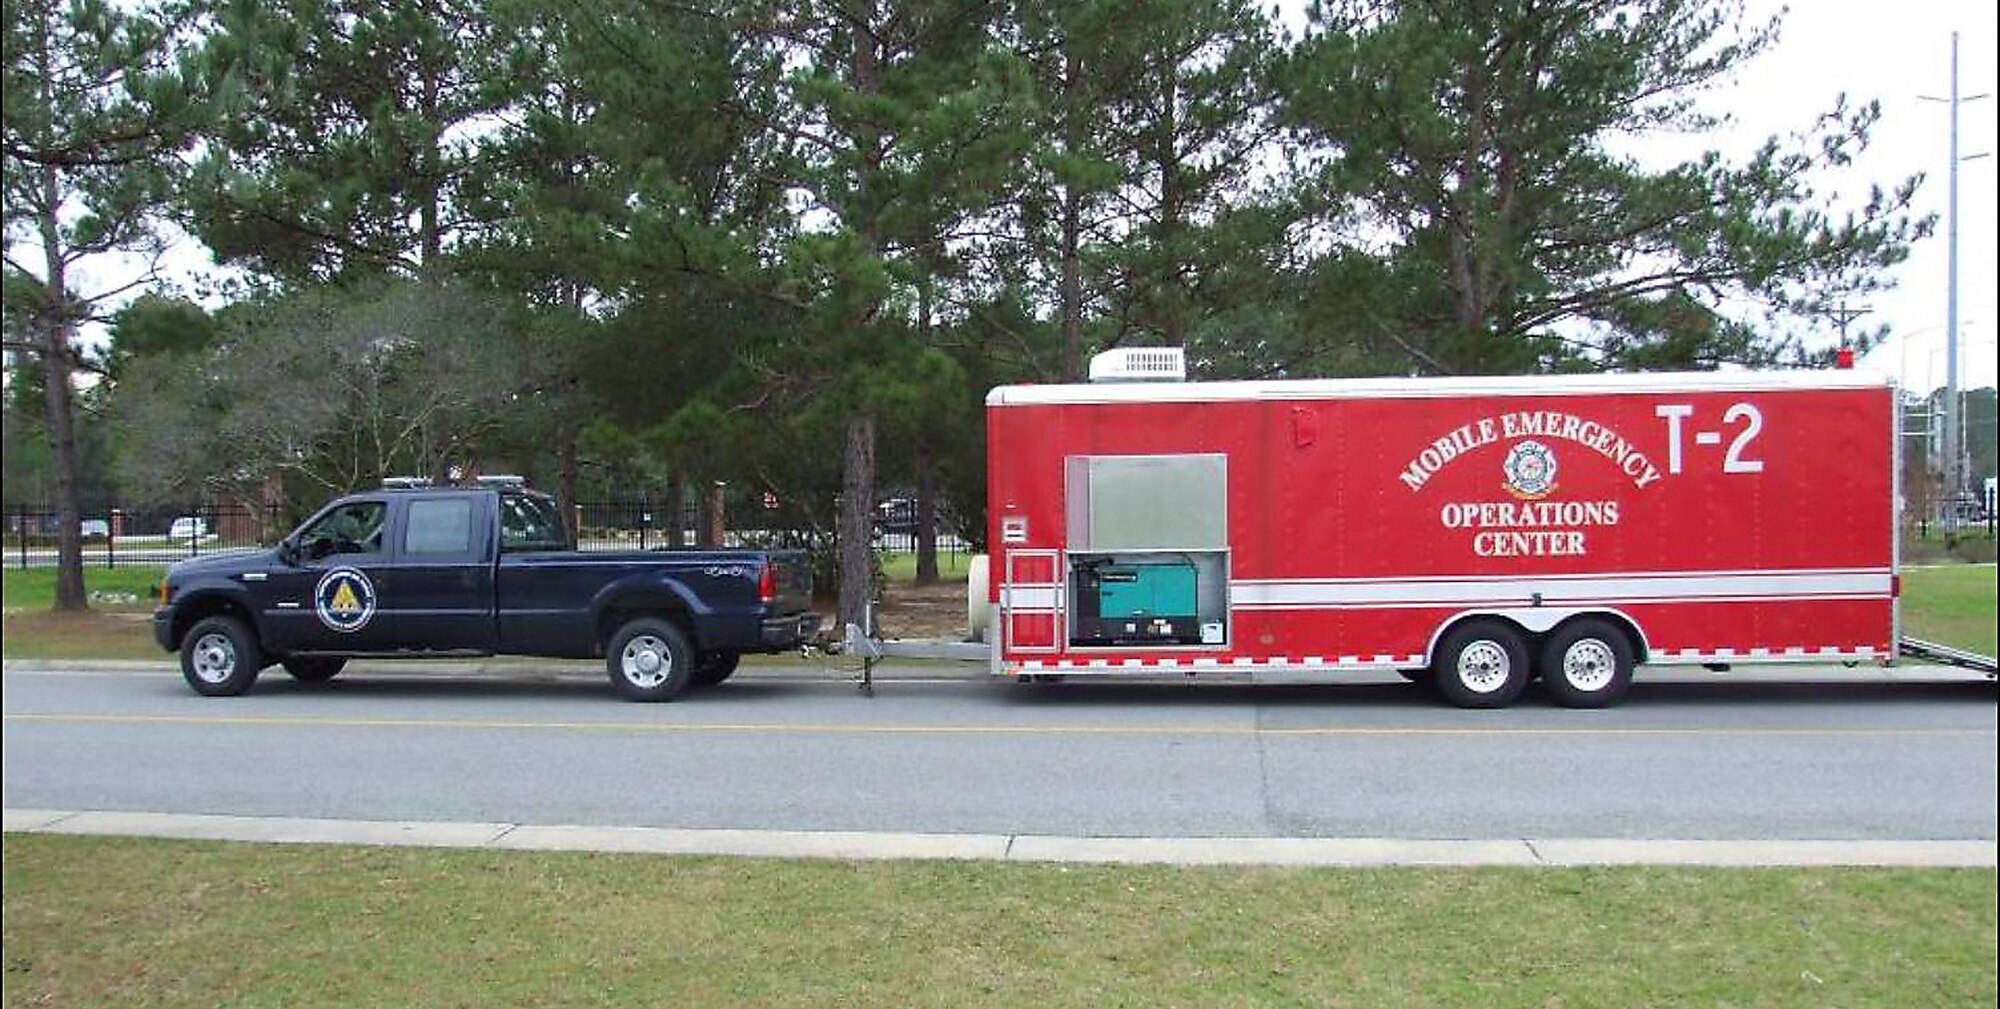 The 23rd Civil Engineer Squadron mobile emergency operations center provides a long-term command center for large operations in and around Moody Air Force Base, Ga. The unit is outfitted with an on-board computer network, video projection equipment, tents and generators for a large team of emergency responders. The center also features a built-in communications center to keep the primary EOC abreast of the latest developments. (U.S. Air Force photo courtesy of the 23rd Civil Engineer Squadron)